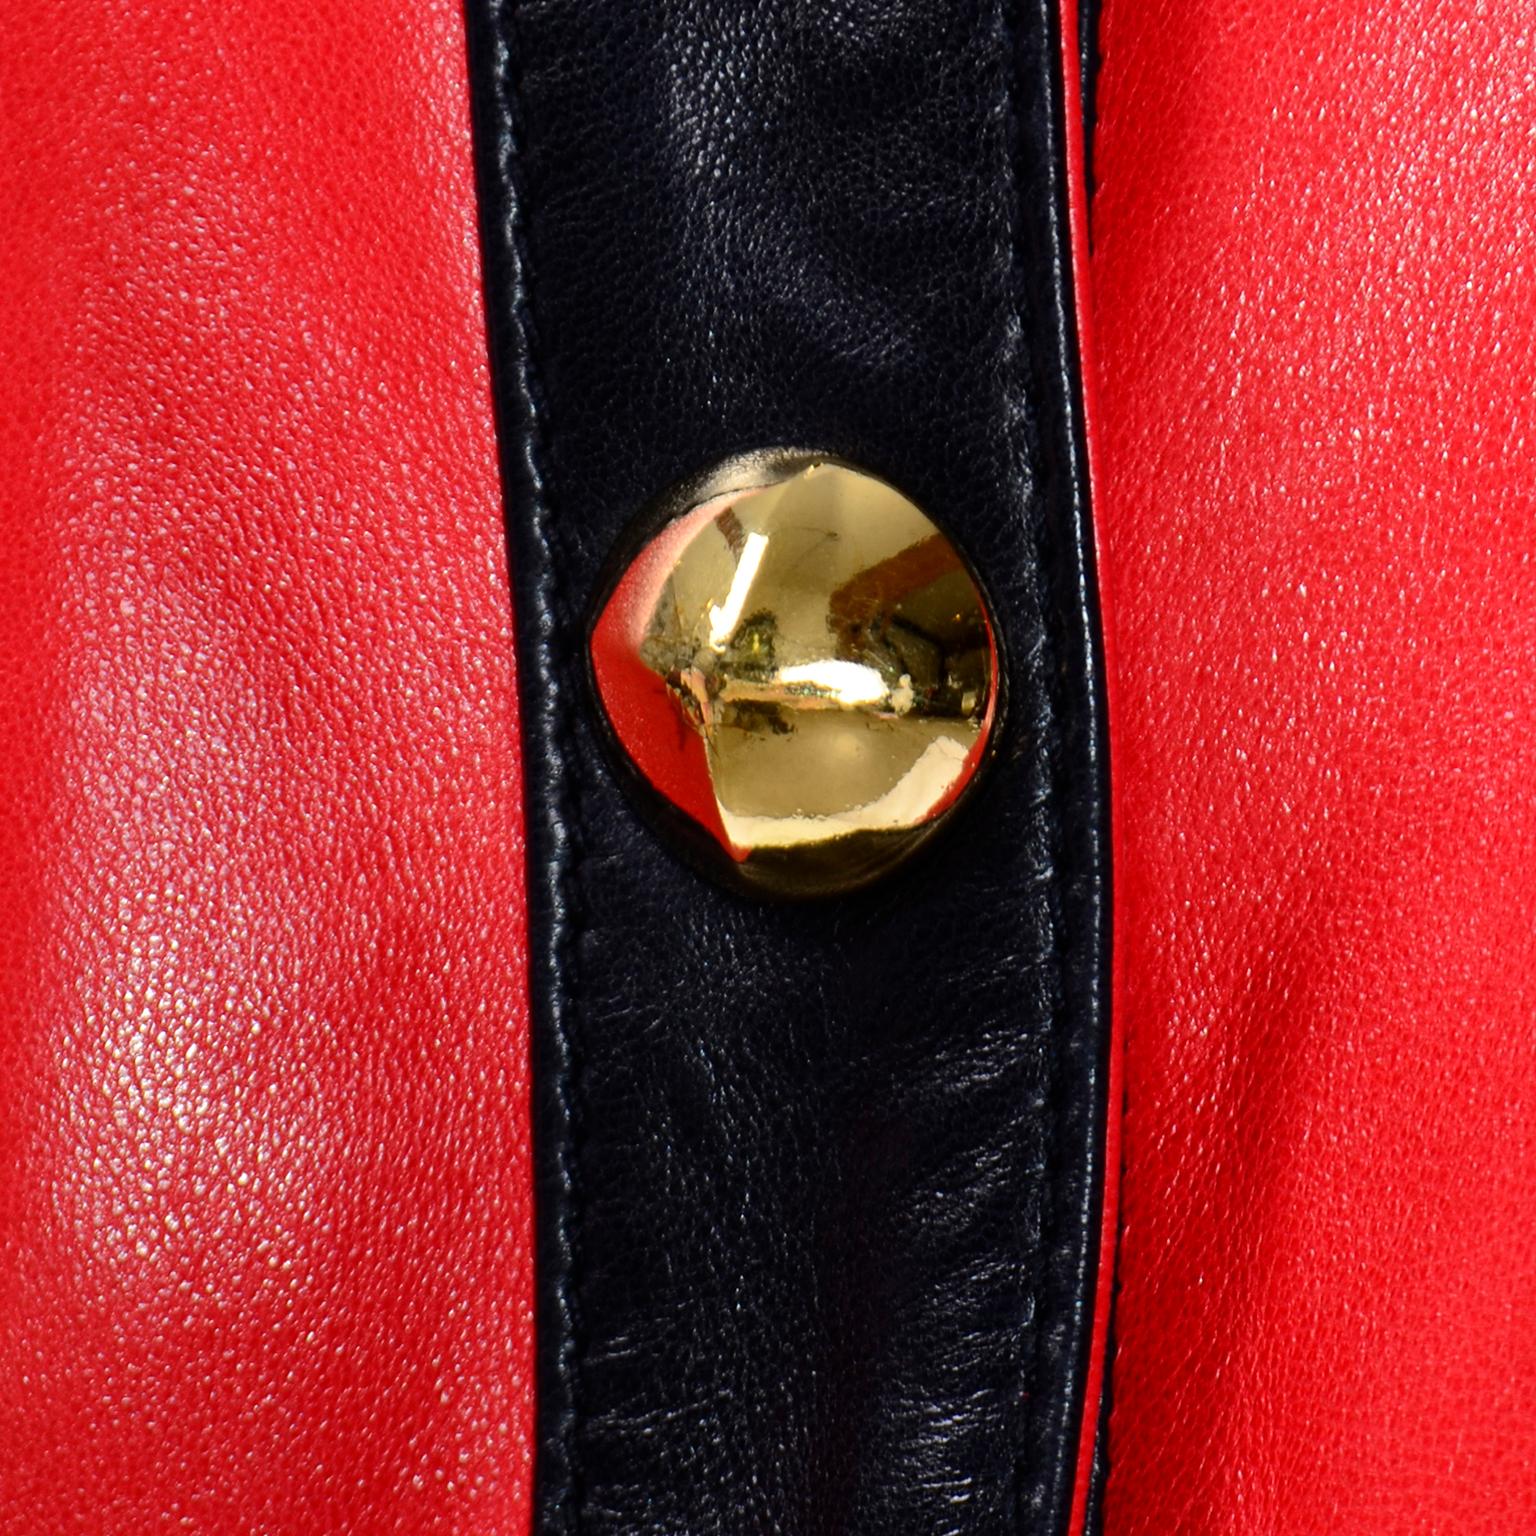 Vintage Escada Red and Black Leather Jacket With Gold Studs by Margaretha Ley 1